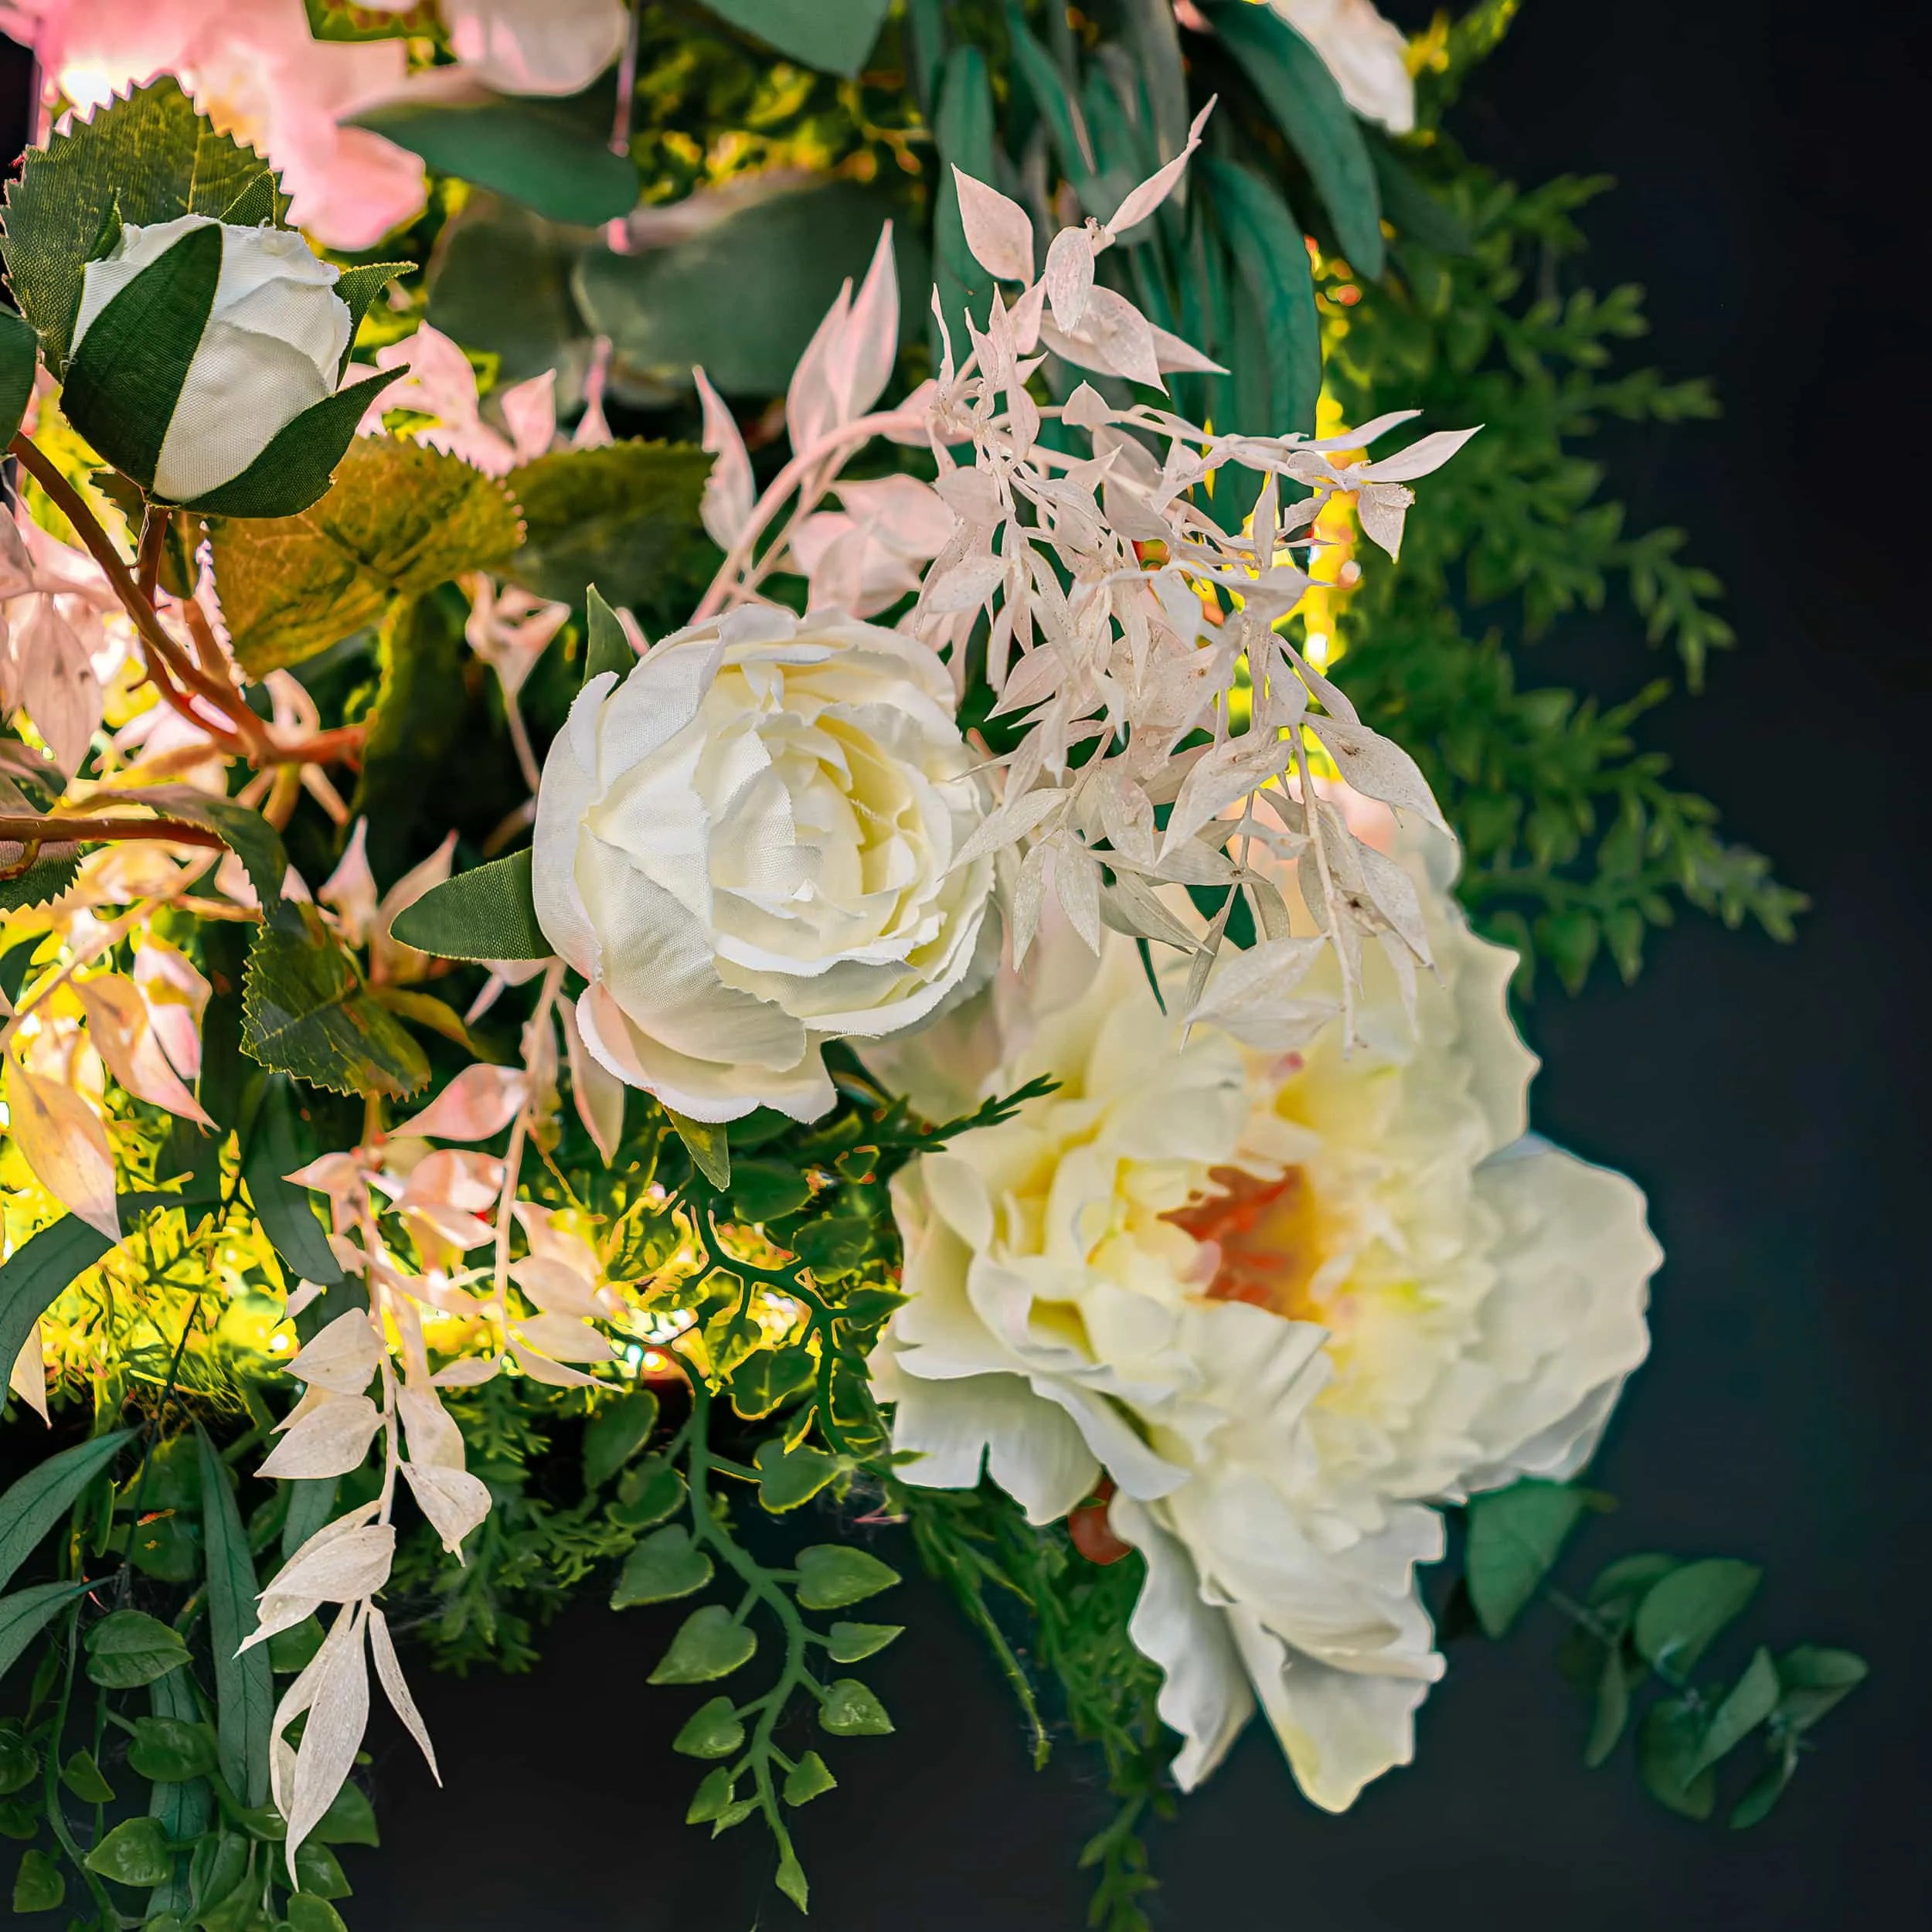 A close-up of an intricate floral display featuring large white roses and delicate pale foliage with a warm glow from ambient lighting, part of a decorative installation at STK Steakhouse.